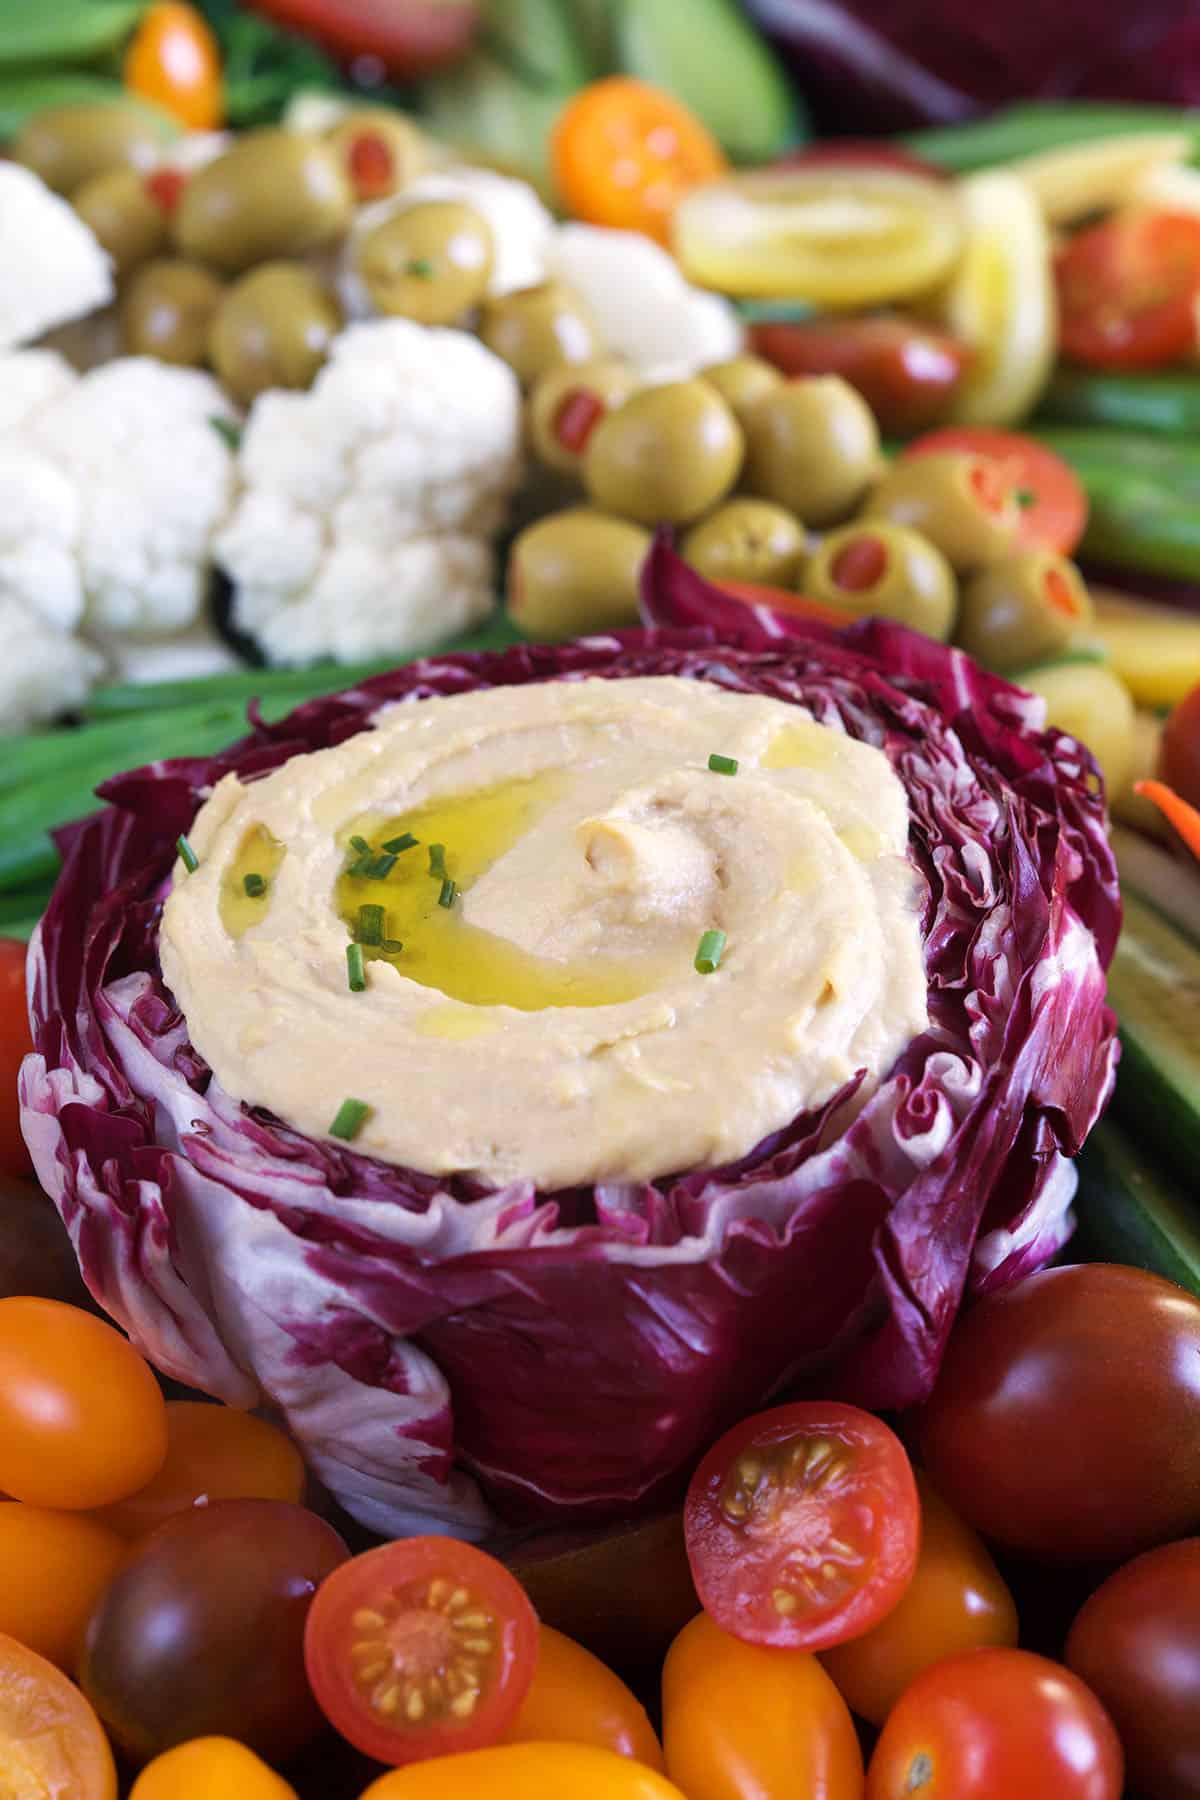 A purple head of cabbage is filled with hummus.